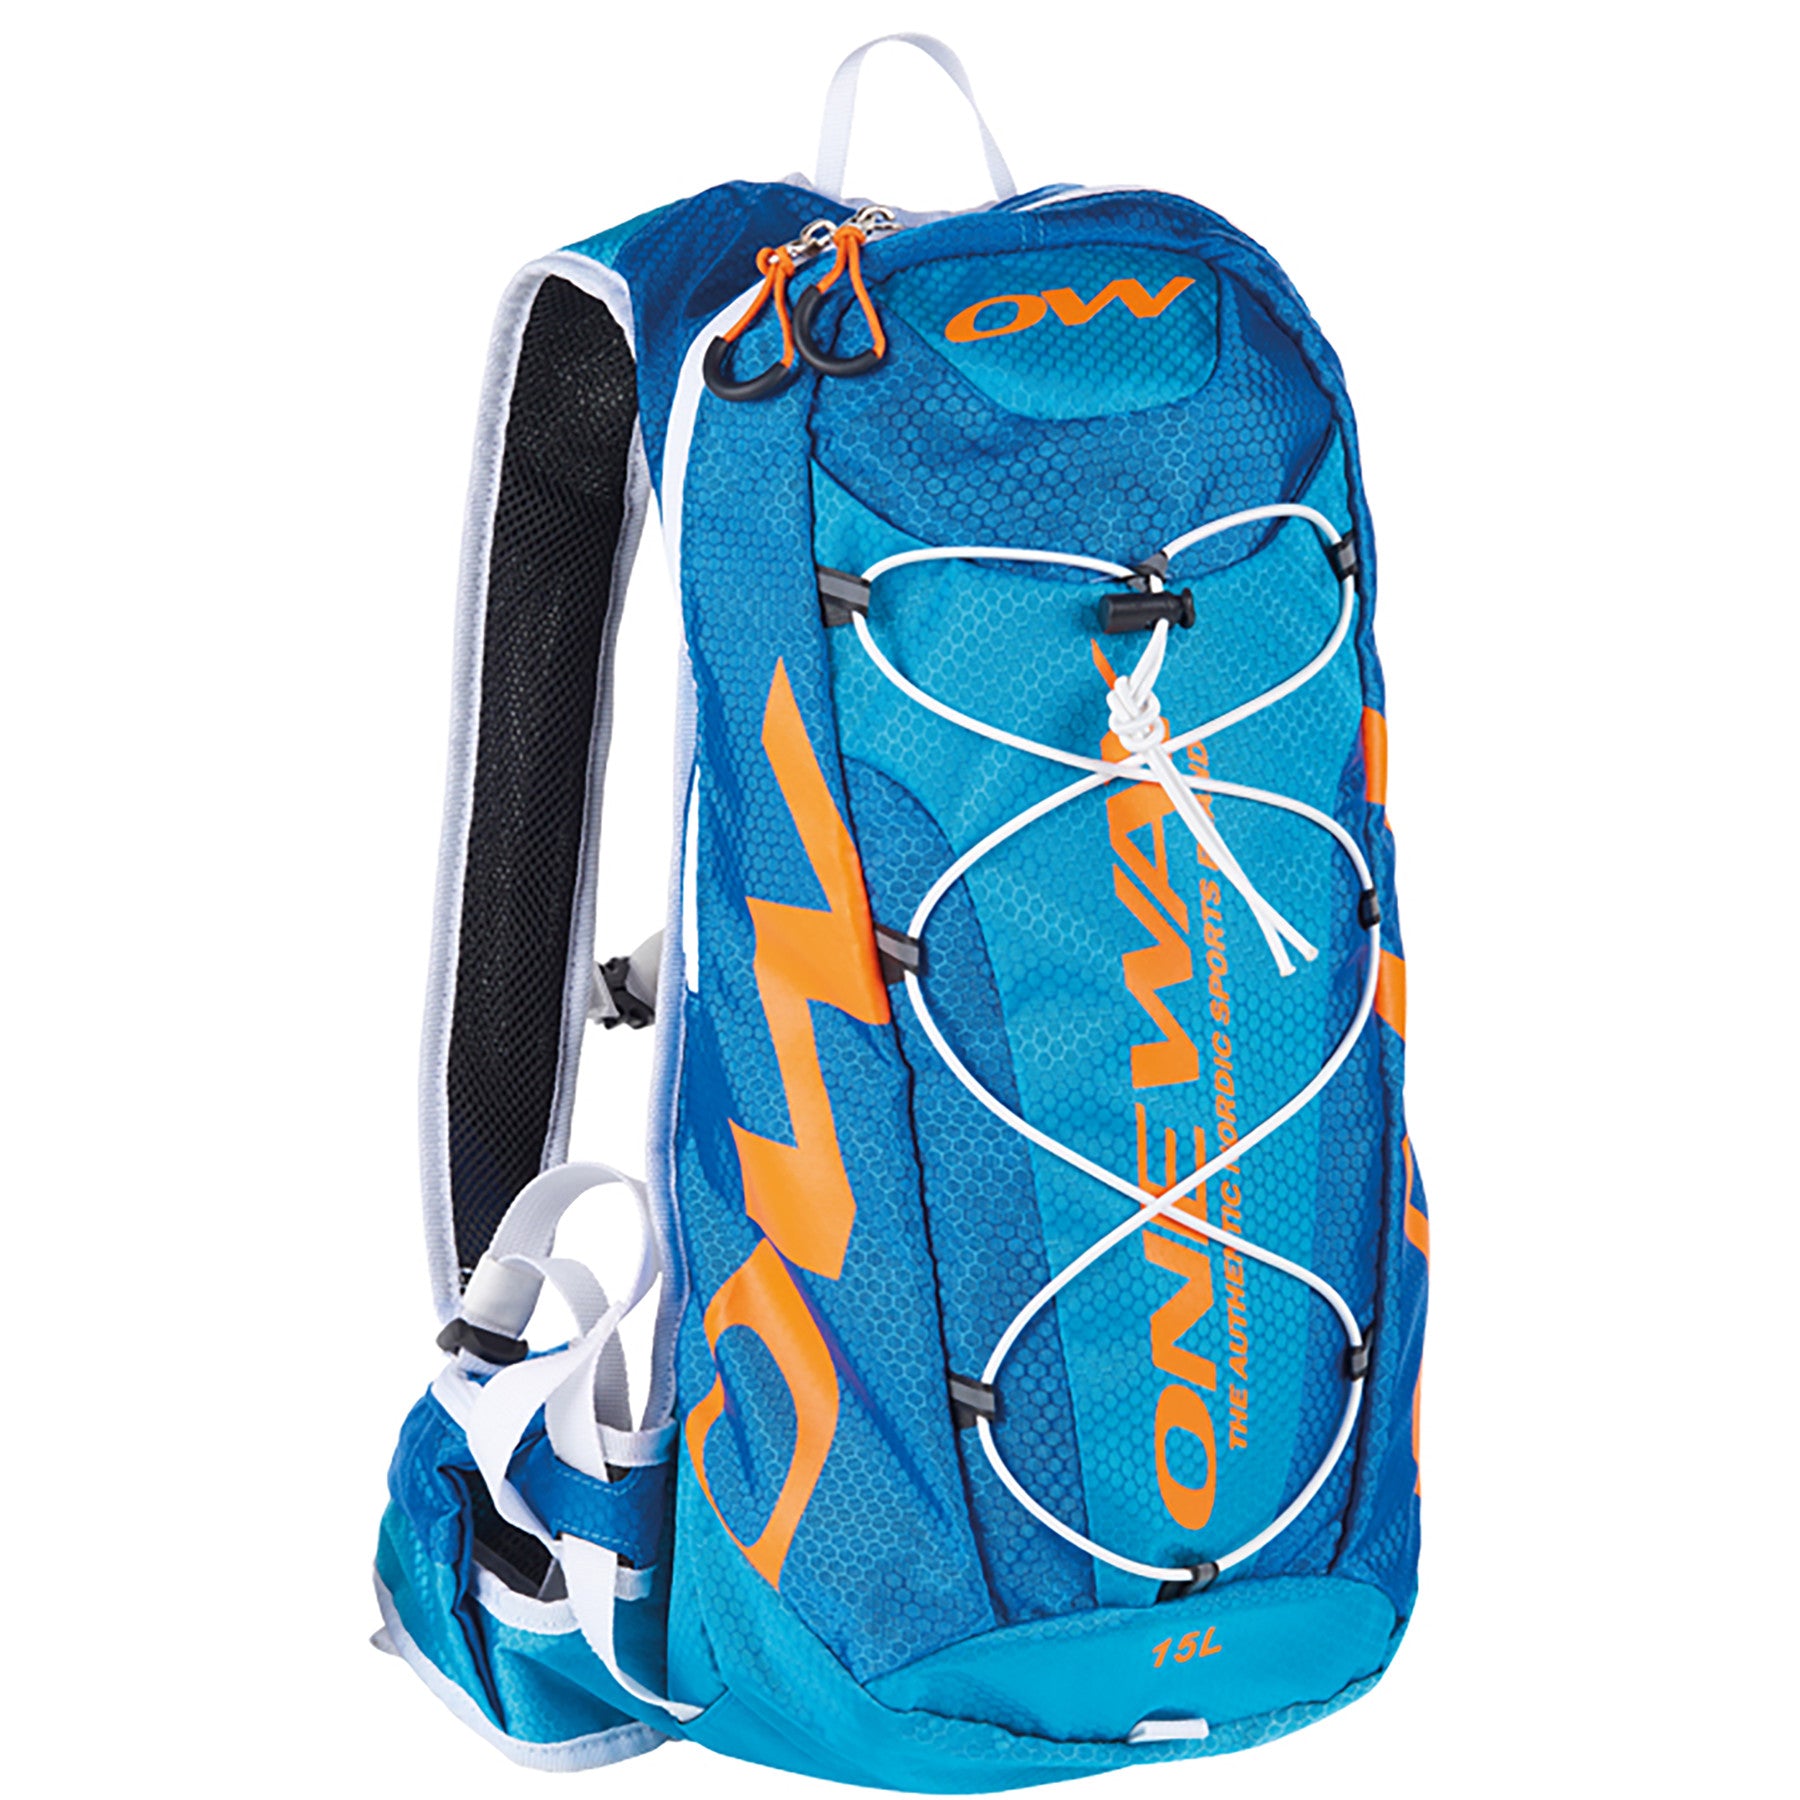 One Way XC HYDRO BACKPACK 15L - BLUE